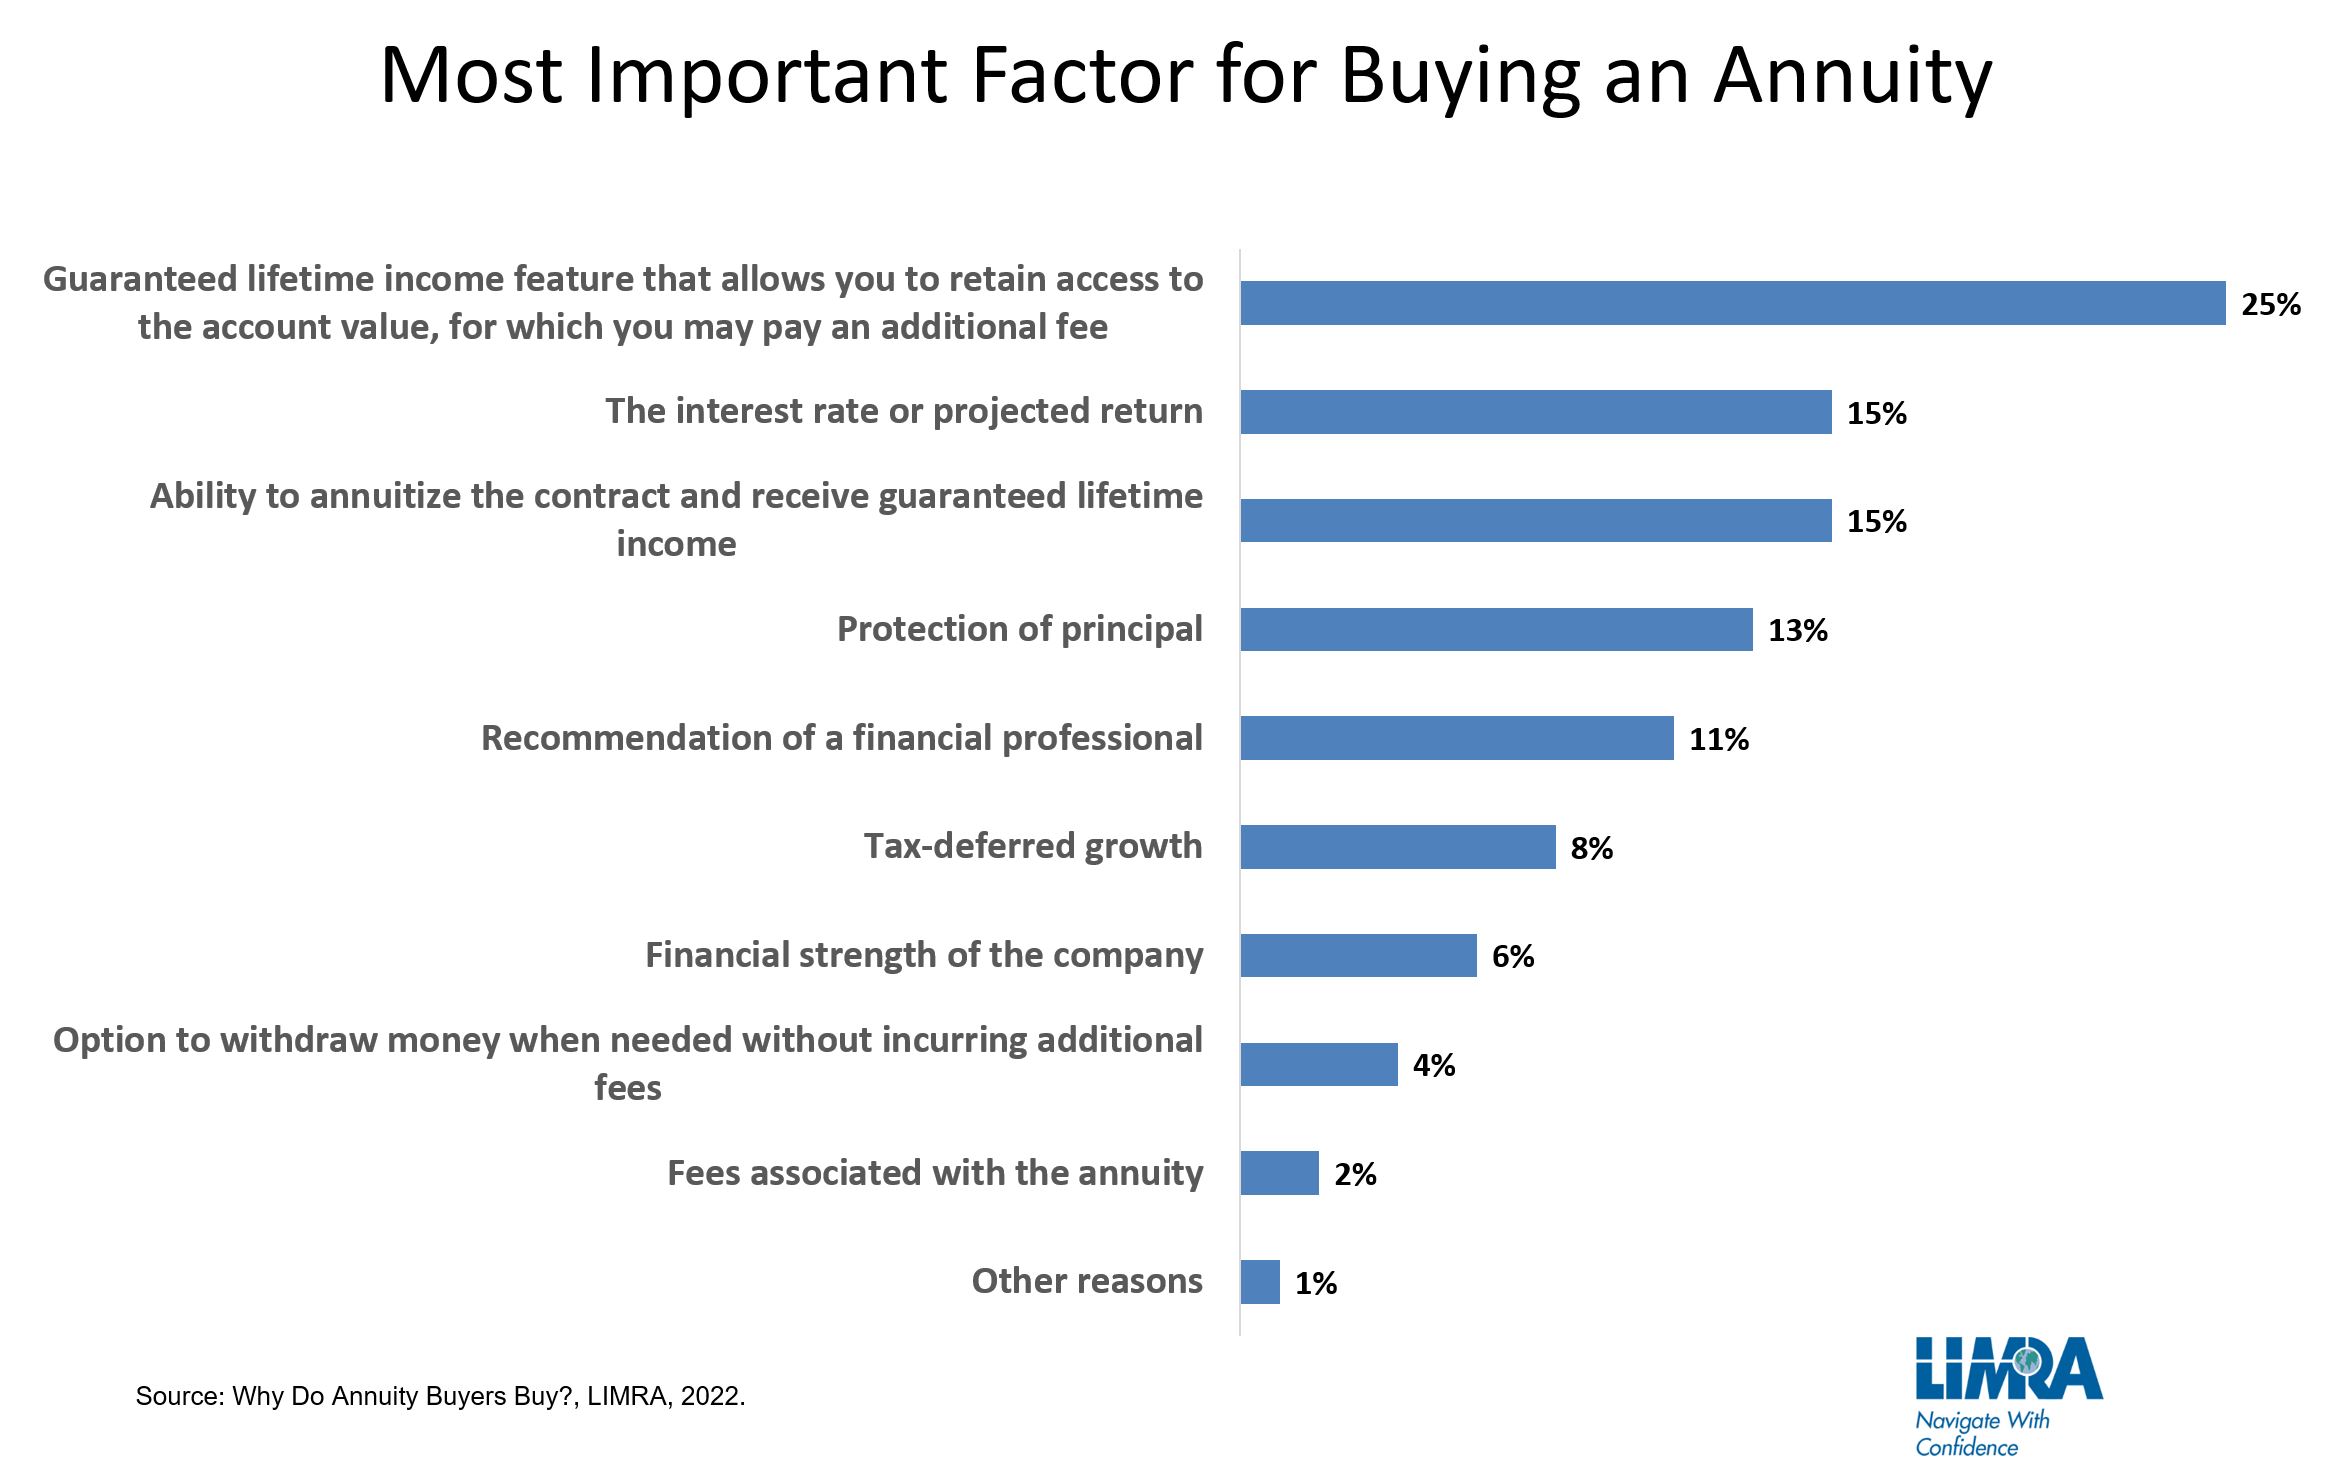 New LIMRA Study Reveals Creating Income Is Top Motive for Annuity Buyers